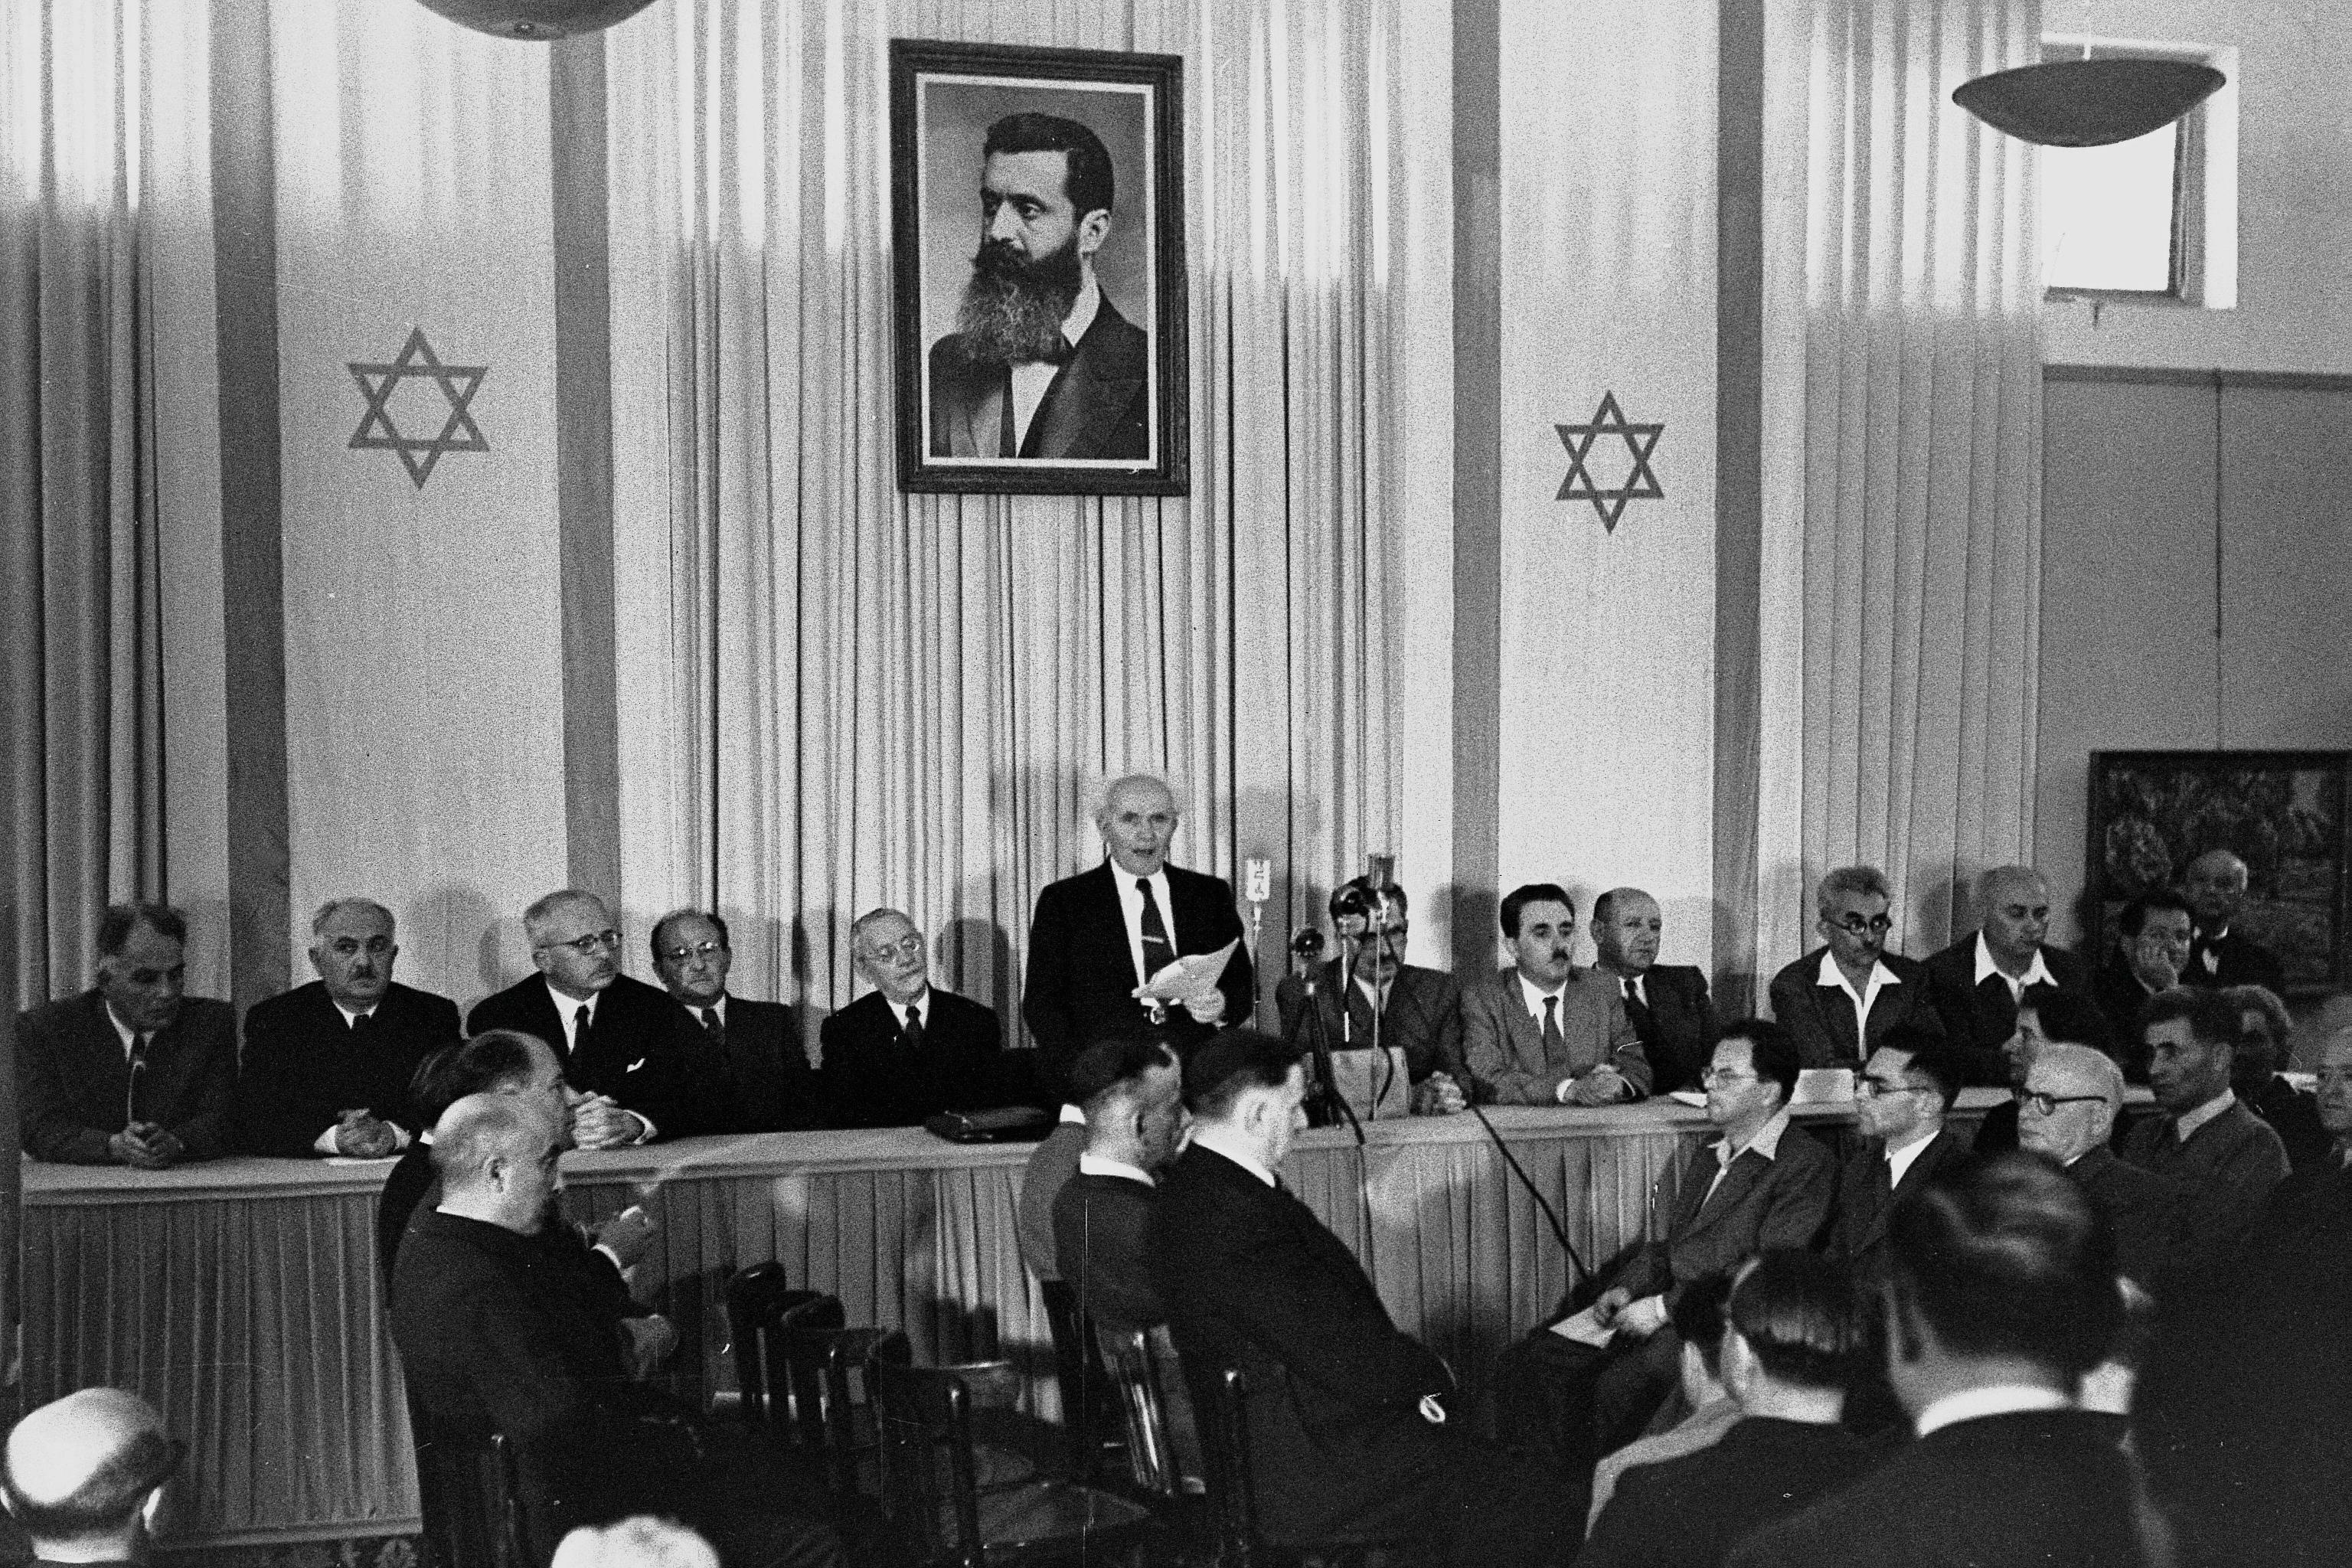 A single man, adorned on both sides by a dozen sitting men, reads a document to a small audience assembled before him. Behind him are two elongated flags bearing the Star of David and portrait of a bearded man in his forties.